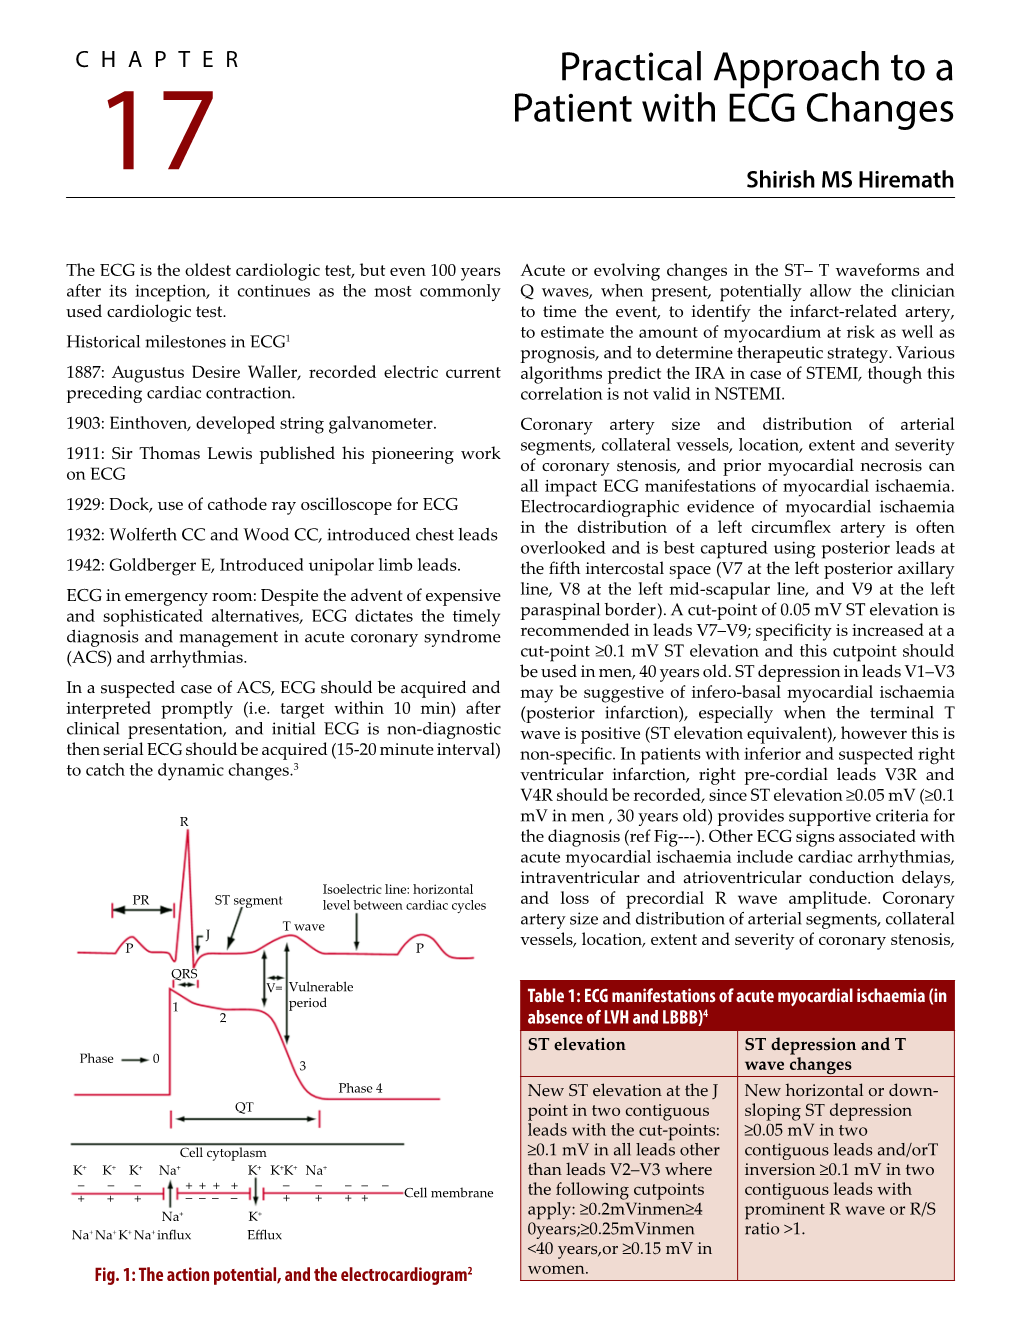 Practical Approach to a Patient with ECG Changes